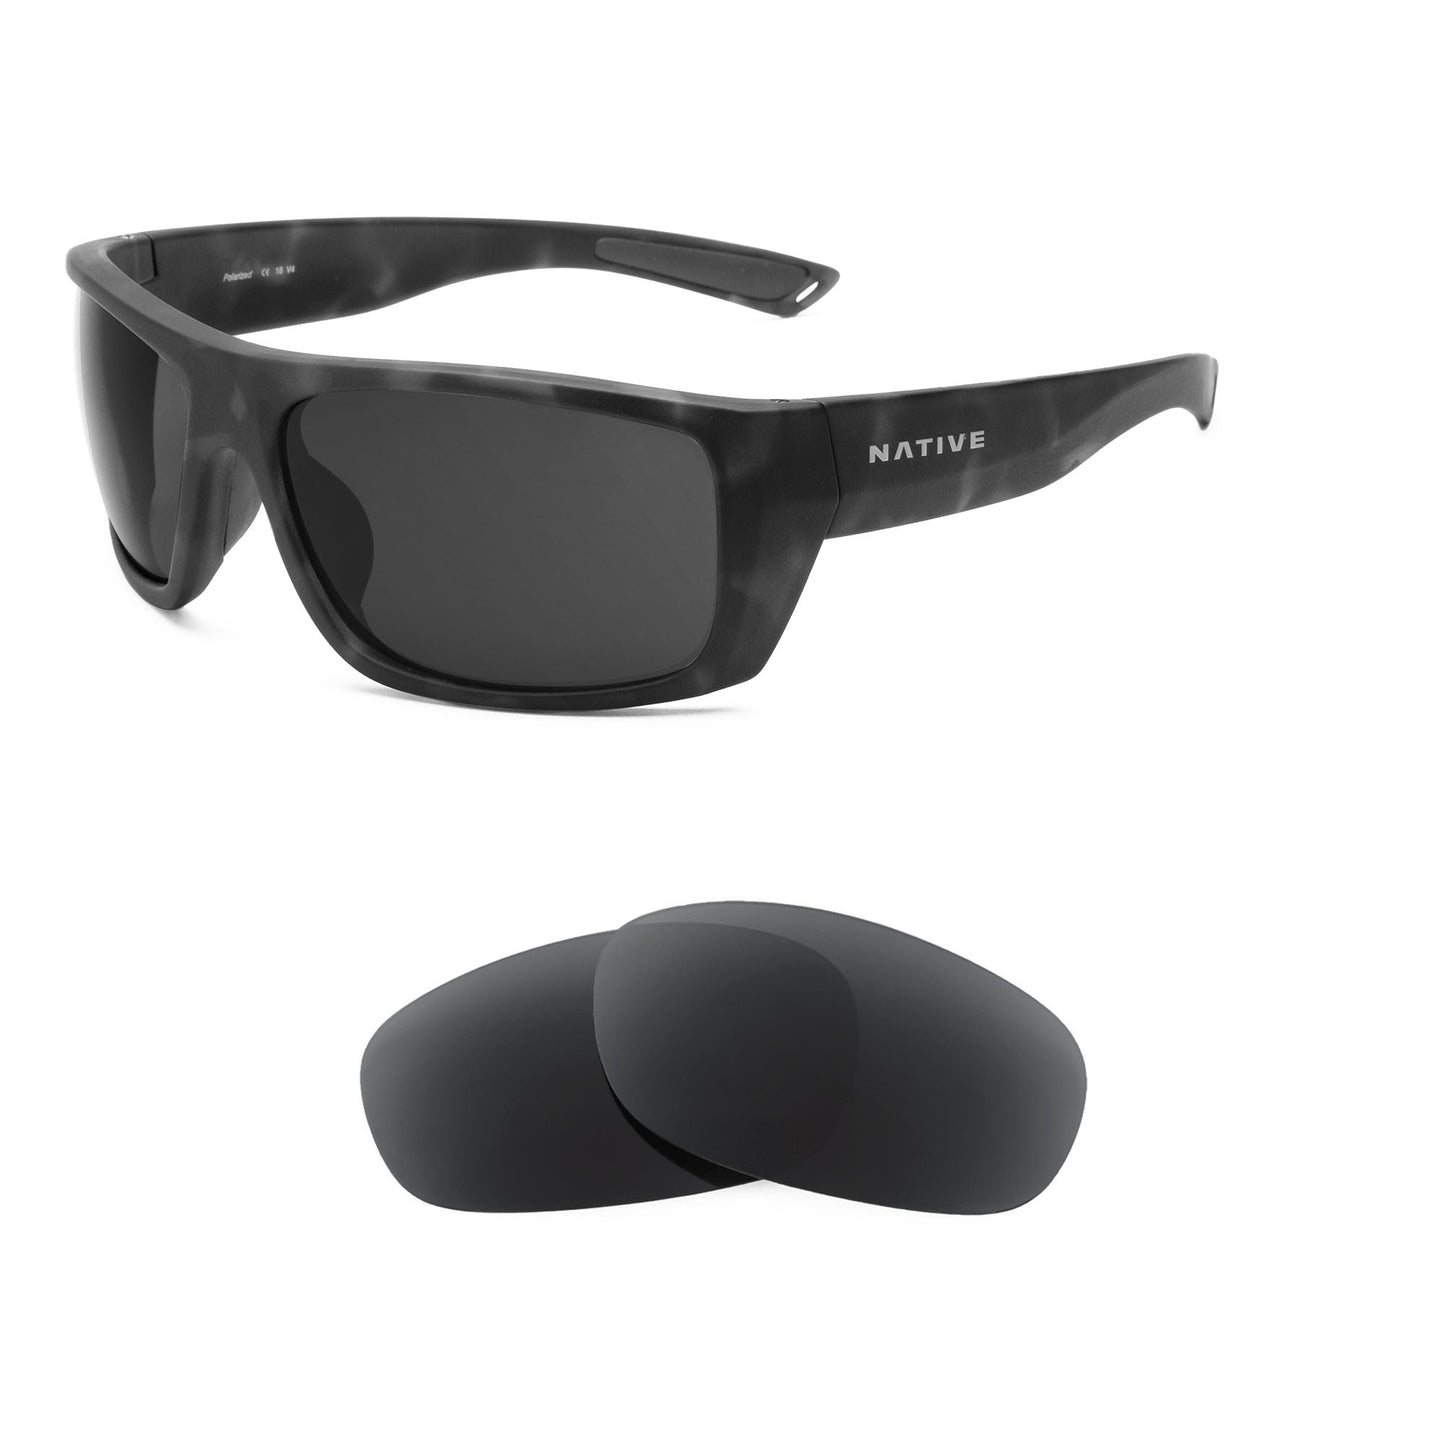 Native Distiller sunglasses with replacement lenses